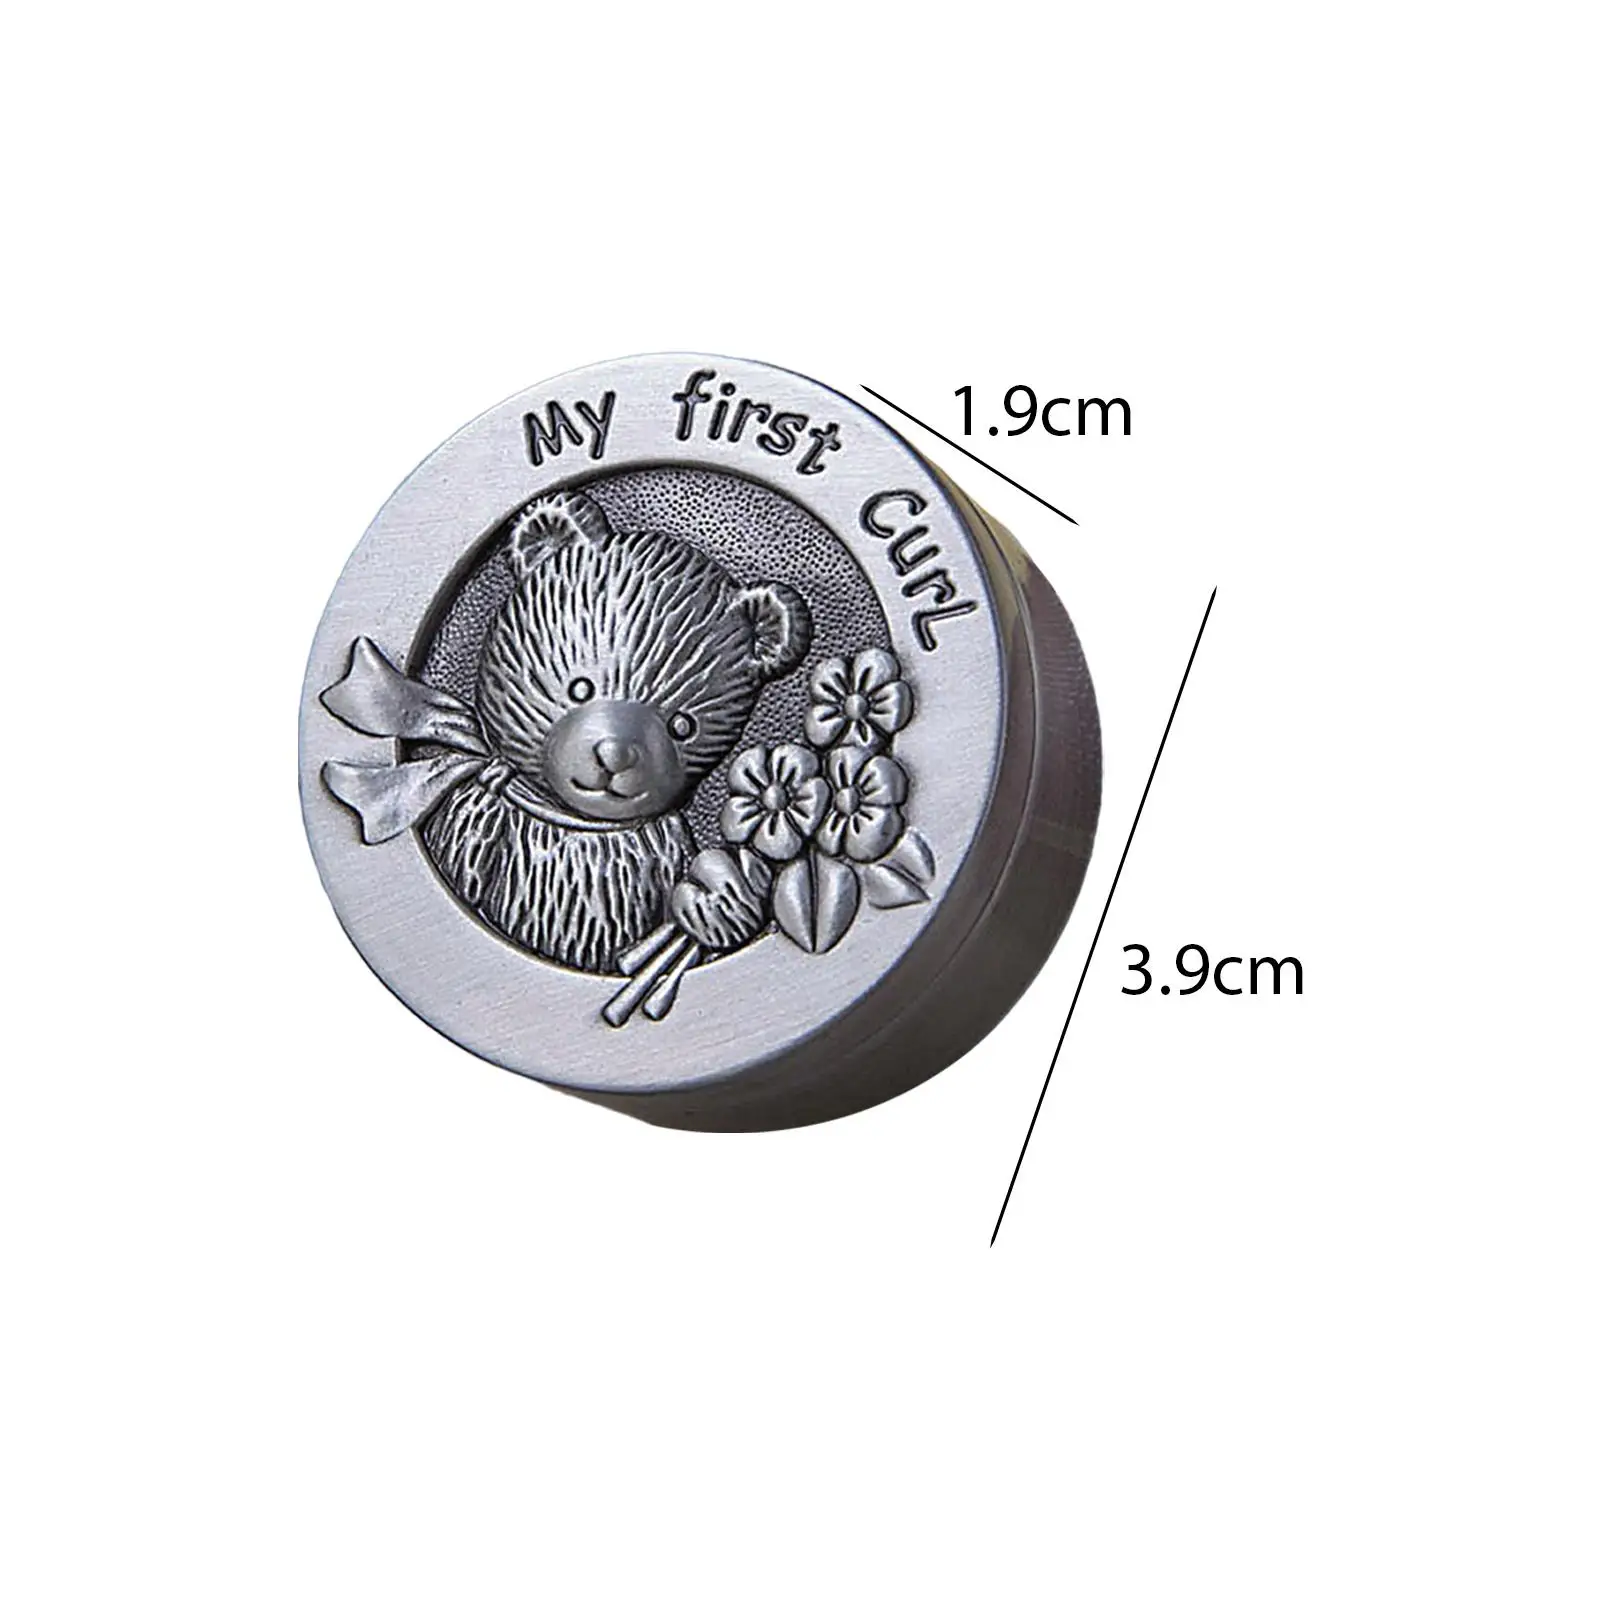 Baby Keepsakes Box Children Growth Witness Metal Storage Metal Memorial Organizer Baby Tooth Fairy Container for Birthday Gift